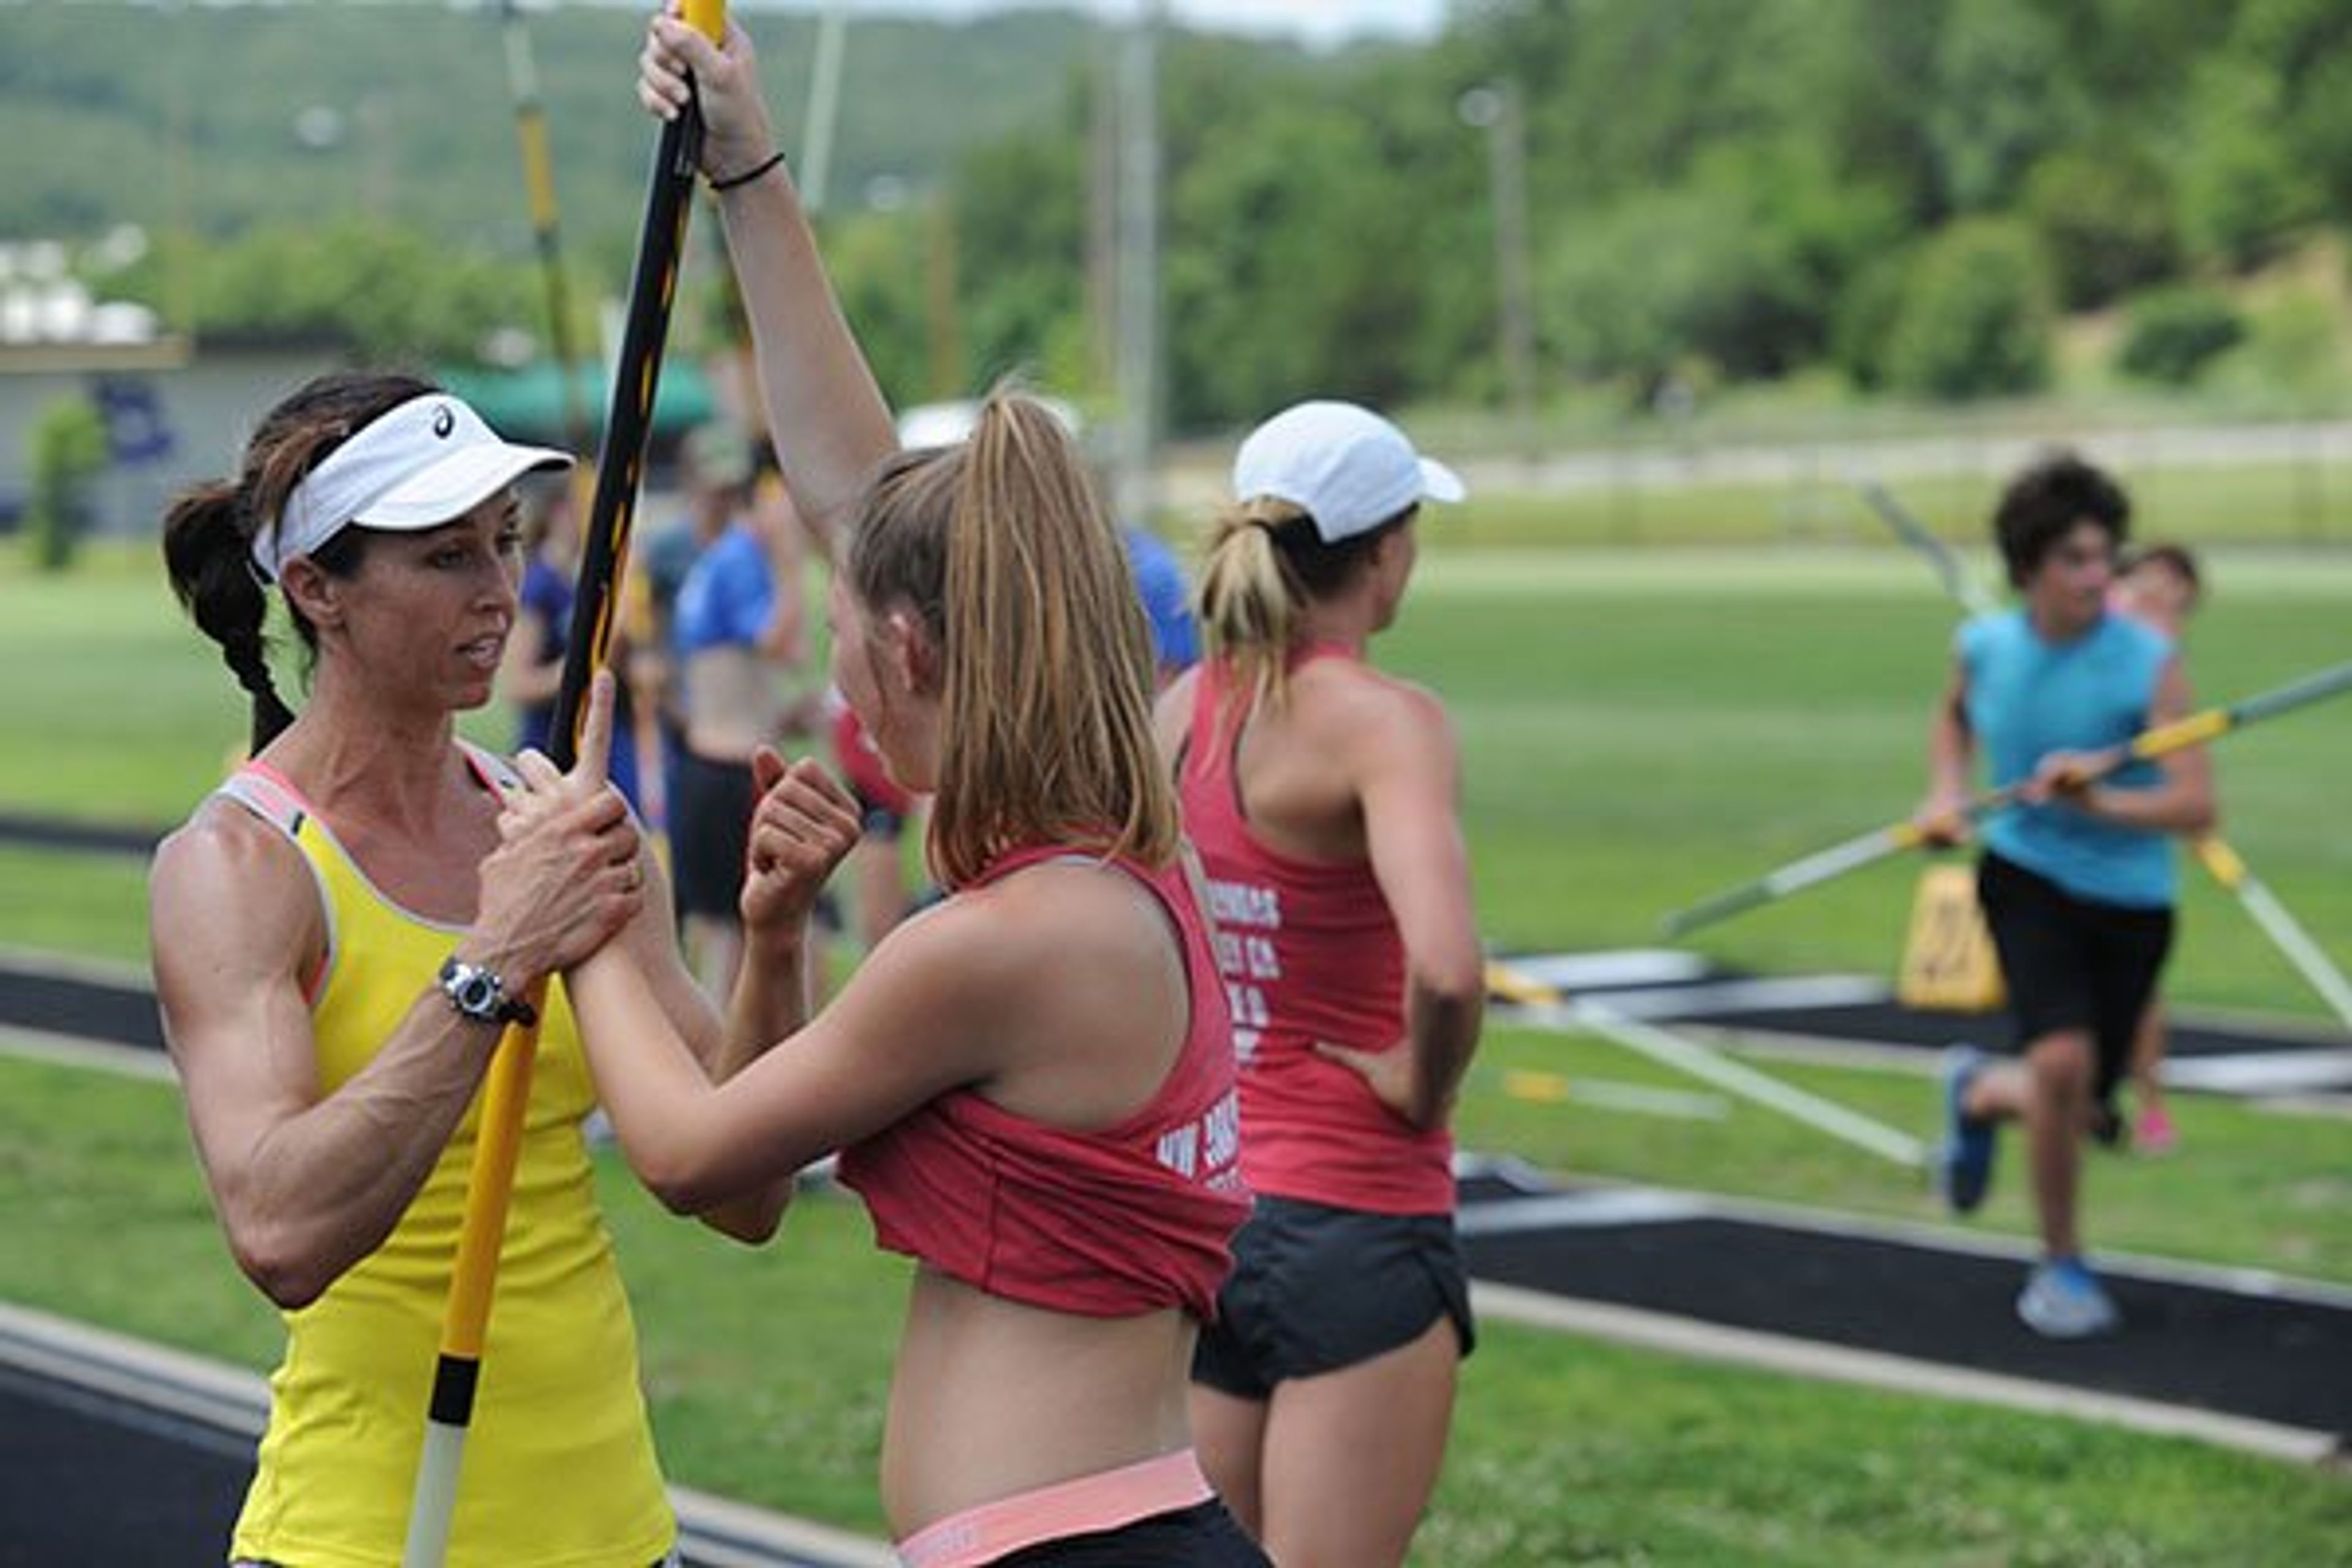 Complete List of Pole Vault Clubs in the USA